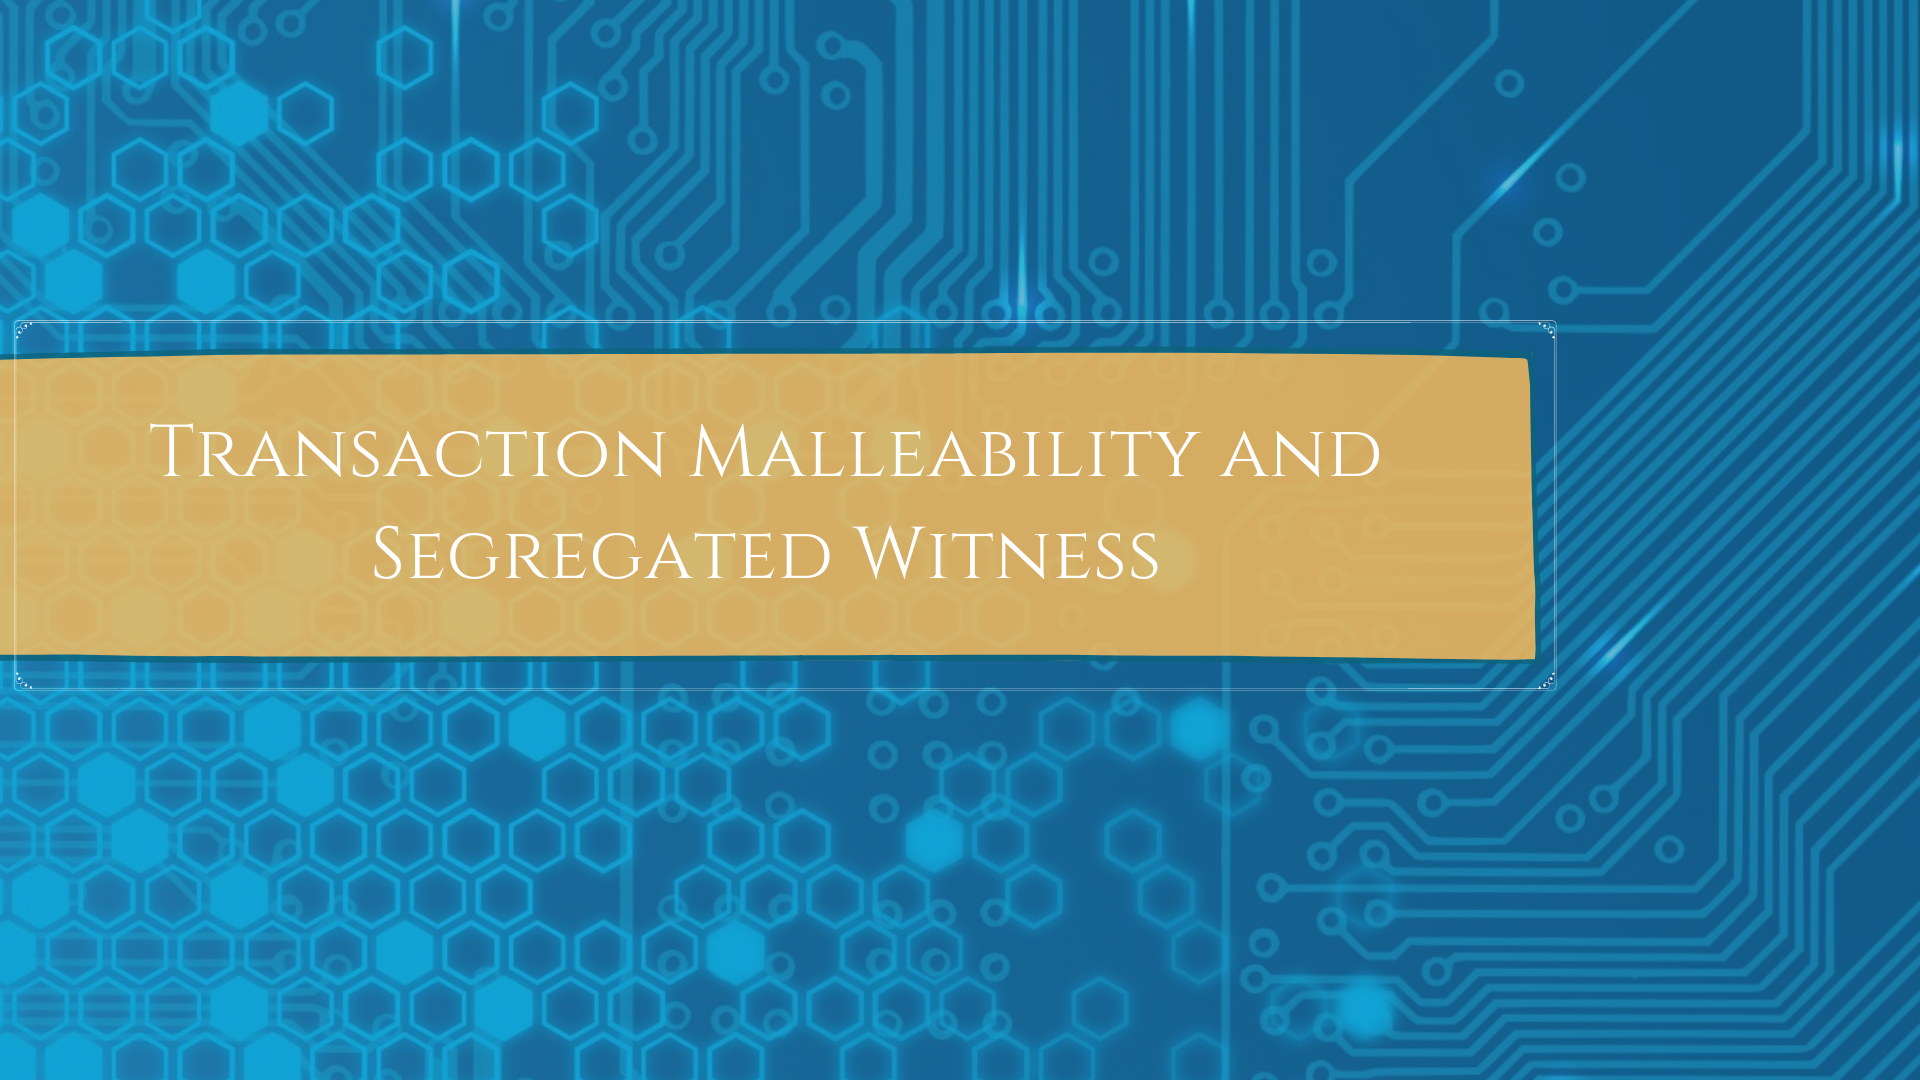 Transaction Malleability and Segregated Witness